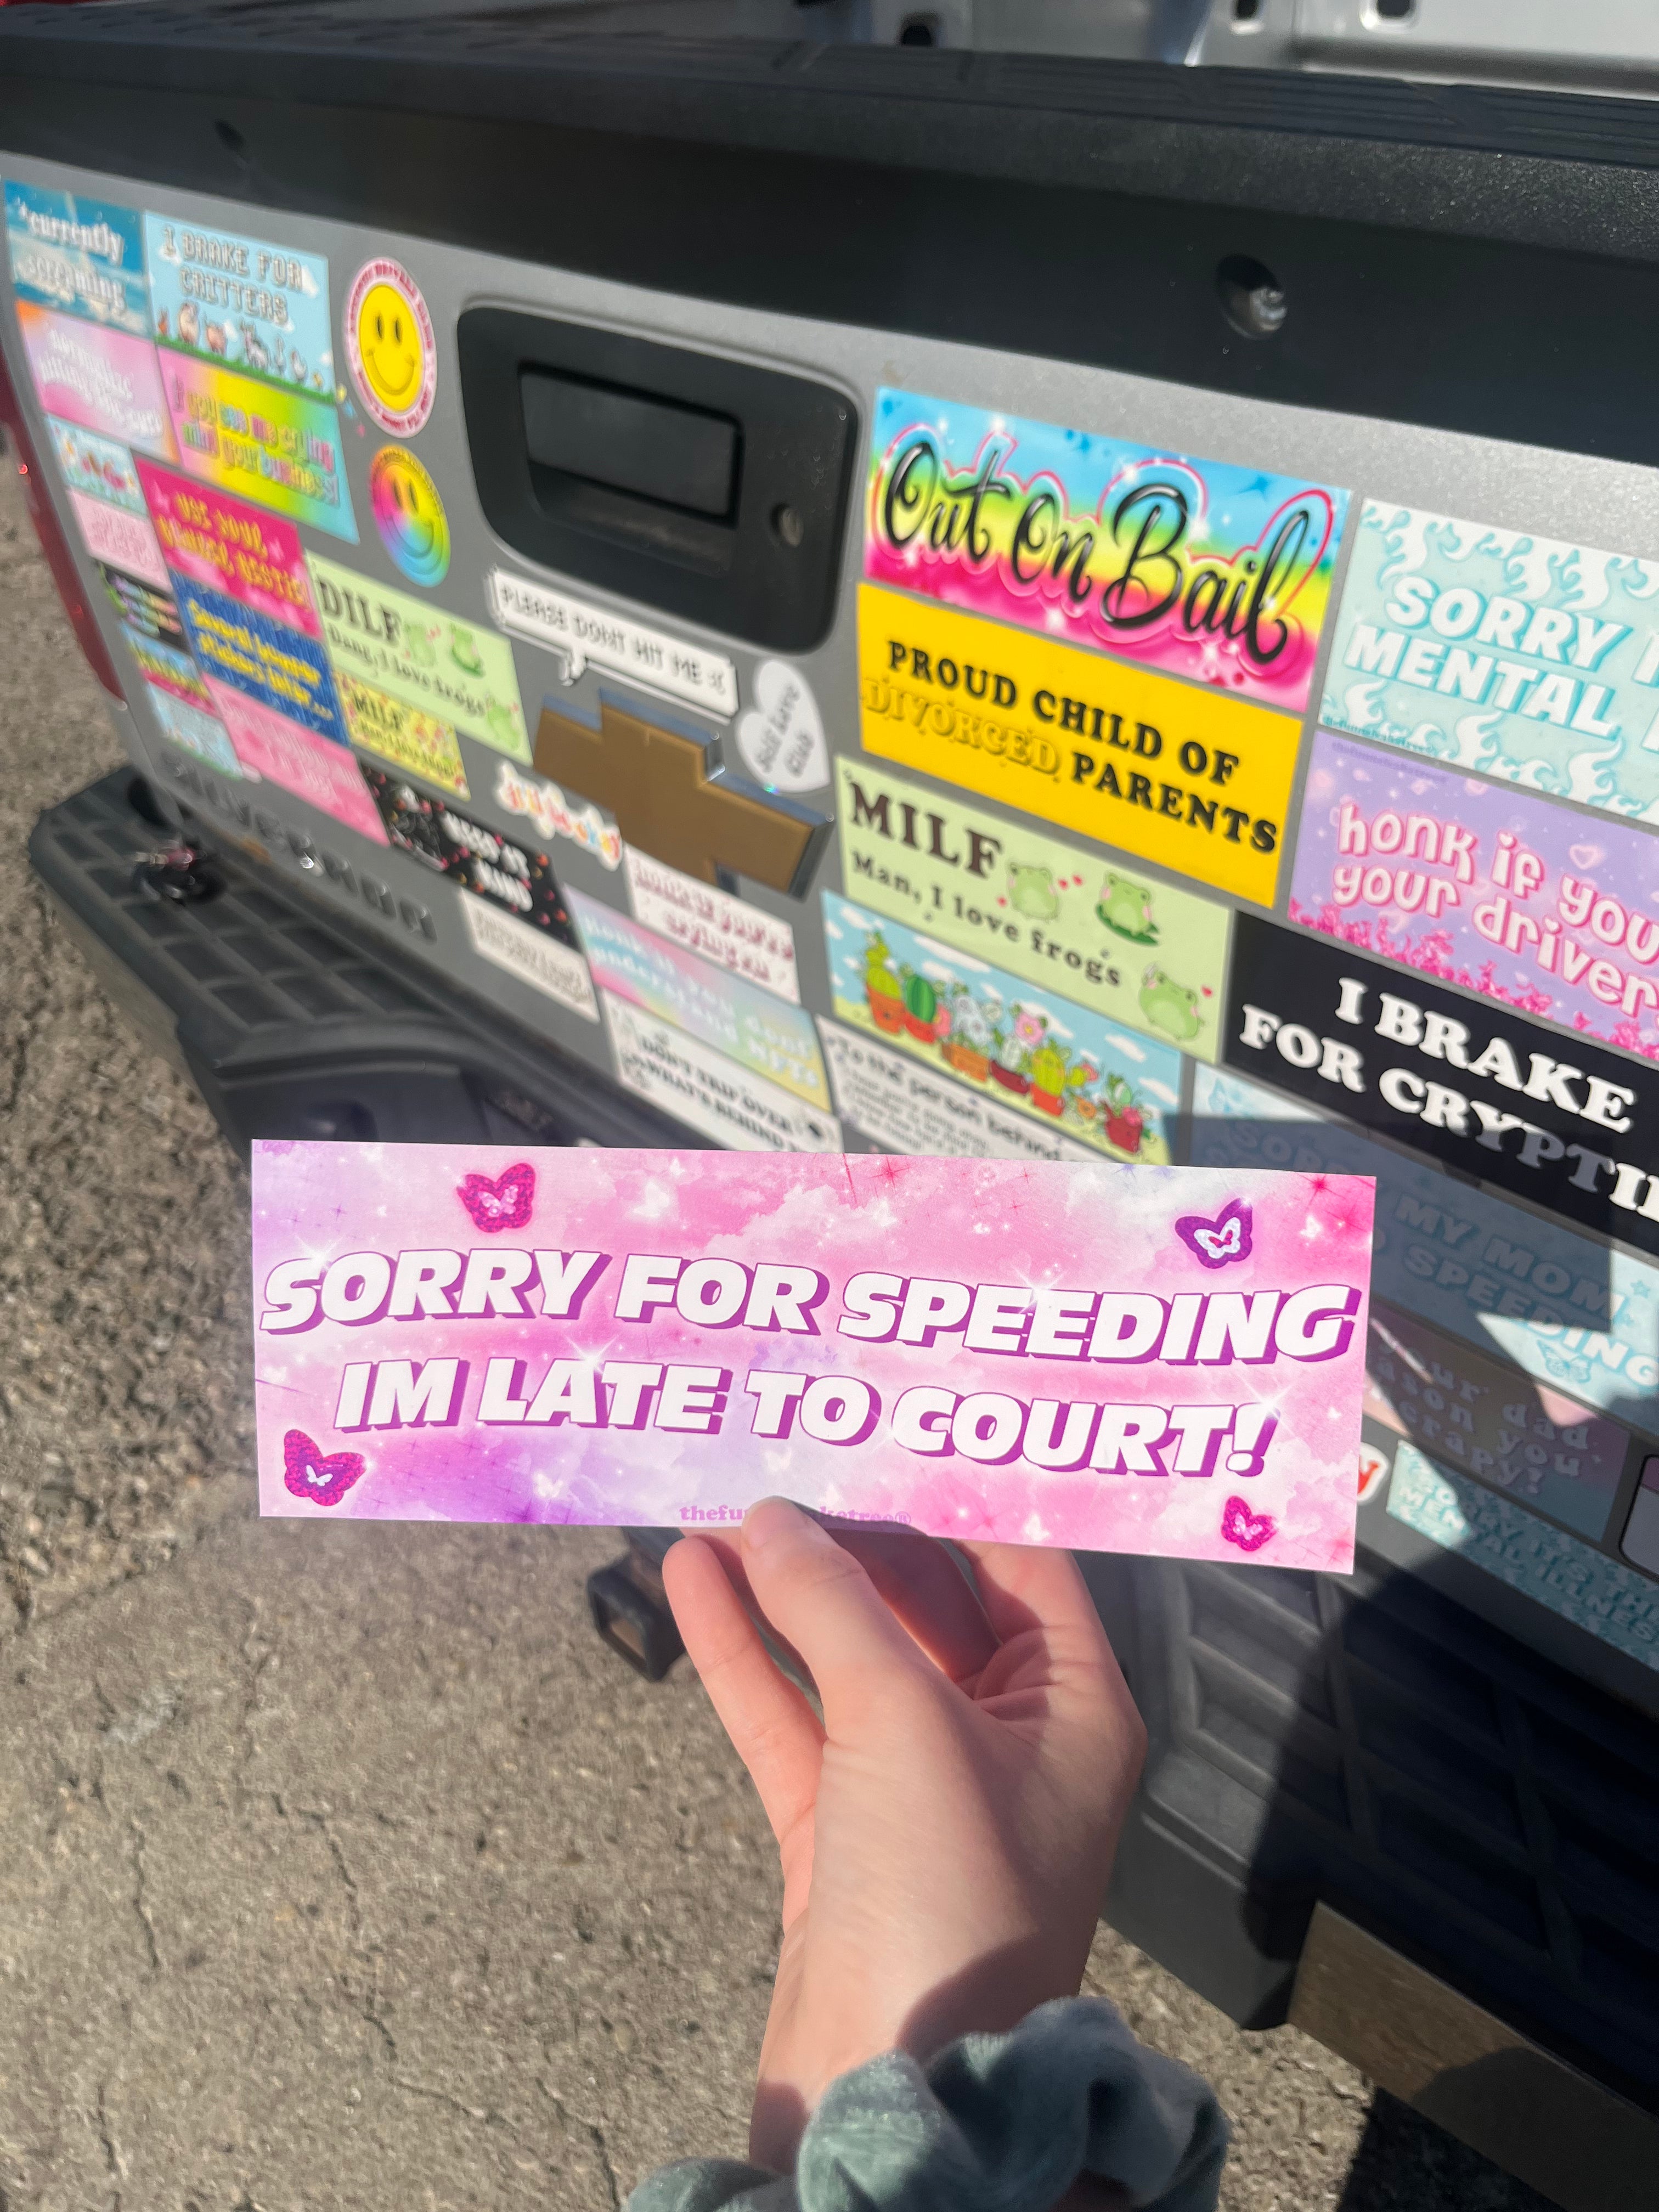 Sorry For Speeding Late To Court Bumper Sticker